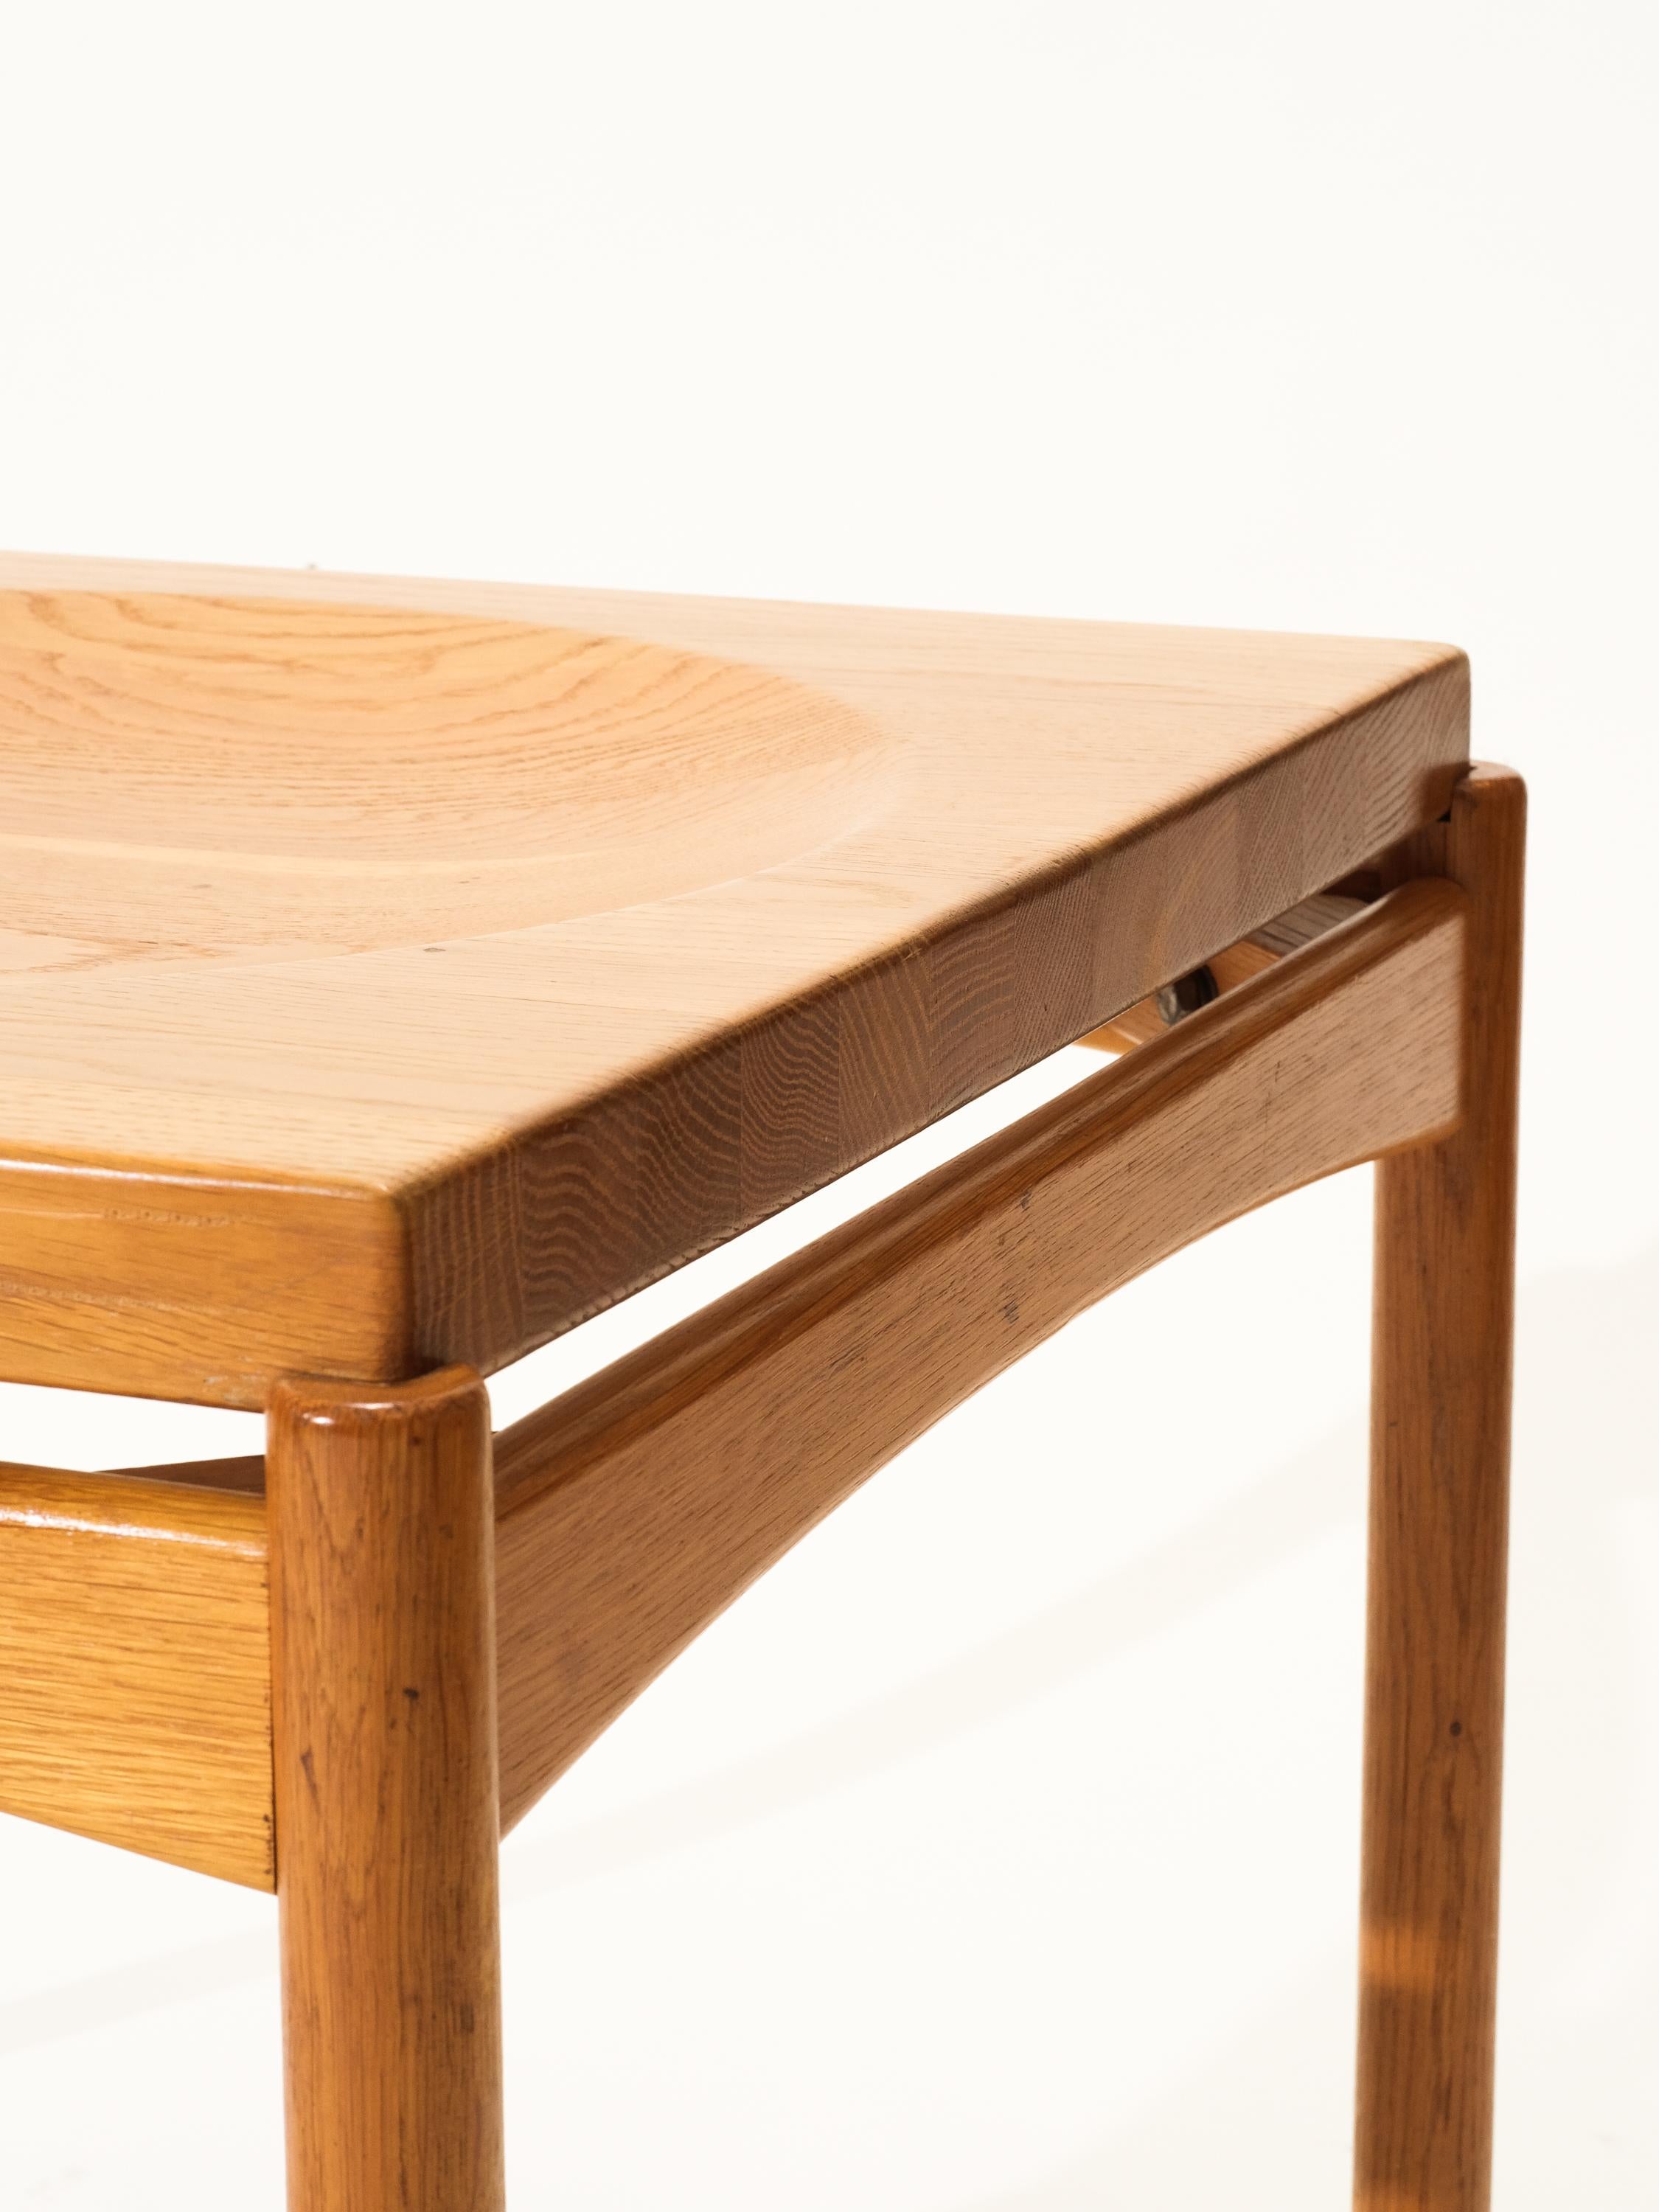 Mid-20th Century Solid Oak Coffee/Tray Table by Gunnar Myrstrand for Källemo, Sweden, 1960s For Sale